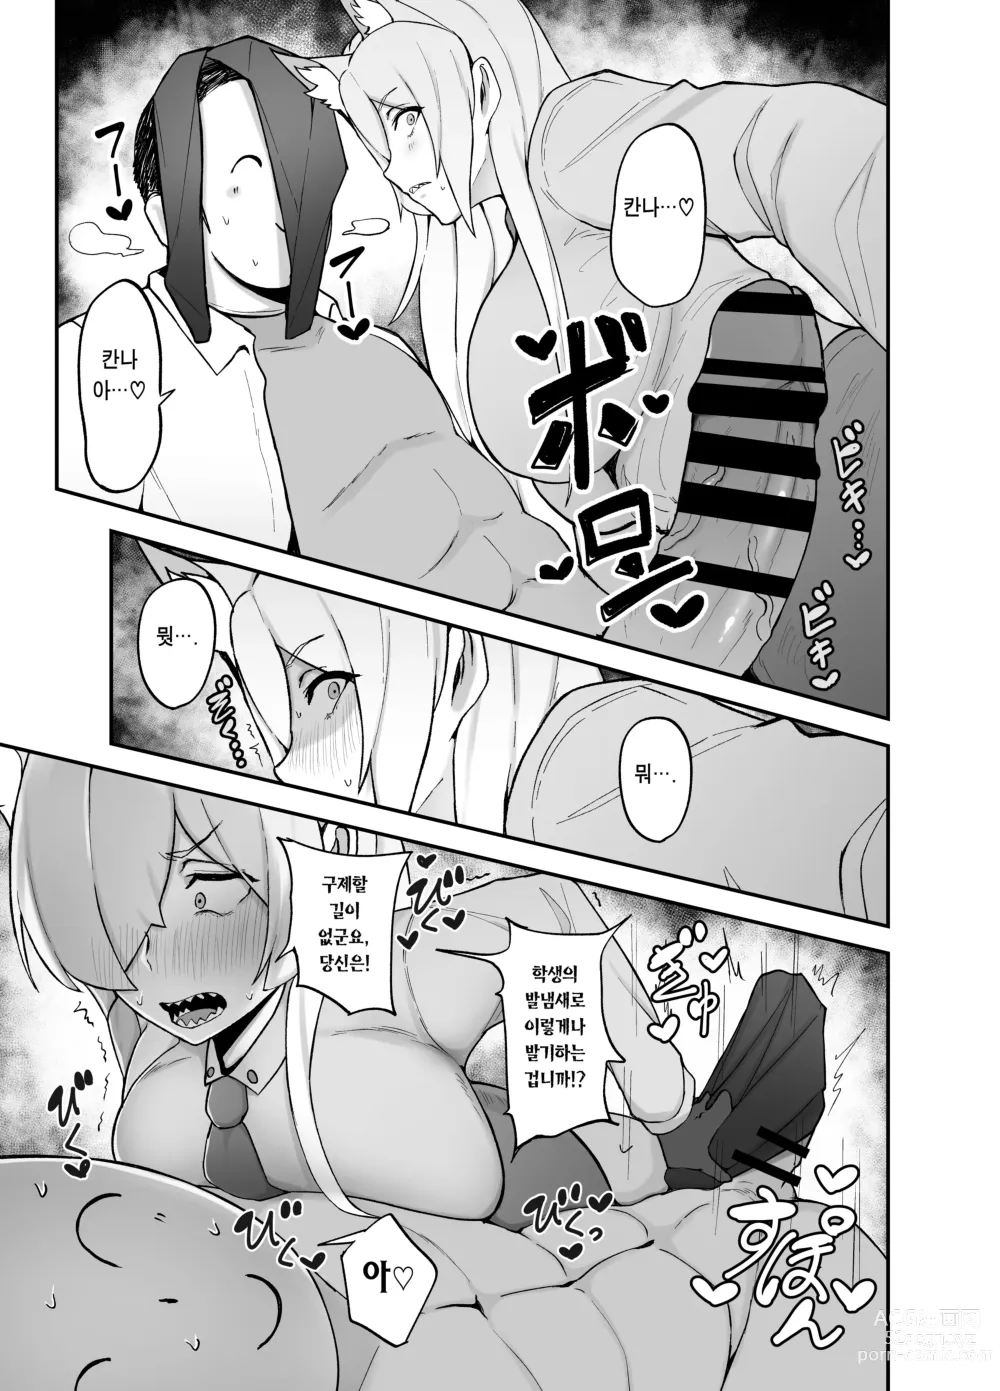 Page 6 of doujinshi 당번은 오가타 칸나